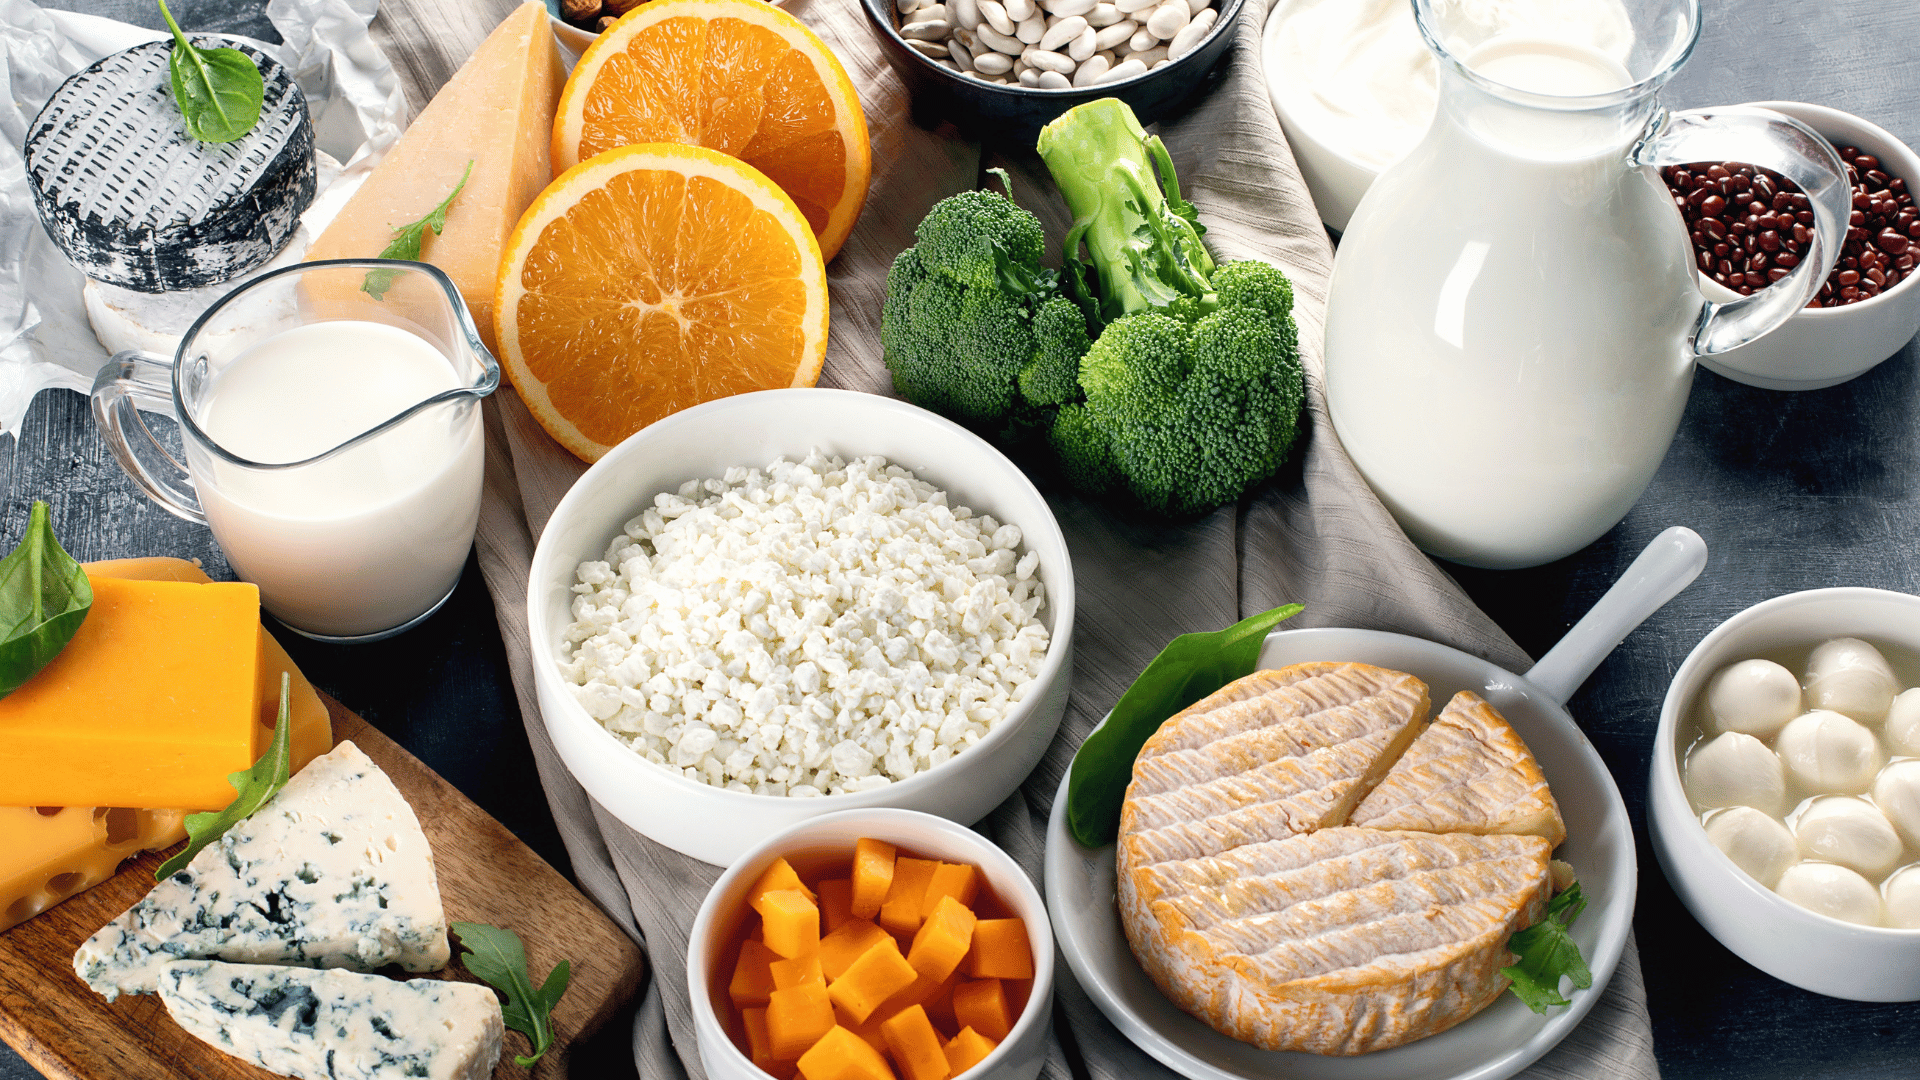 What Is Calcium? Benefits, Sources and More